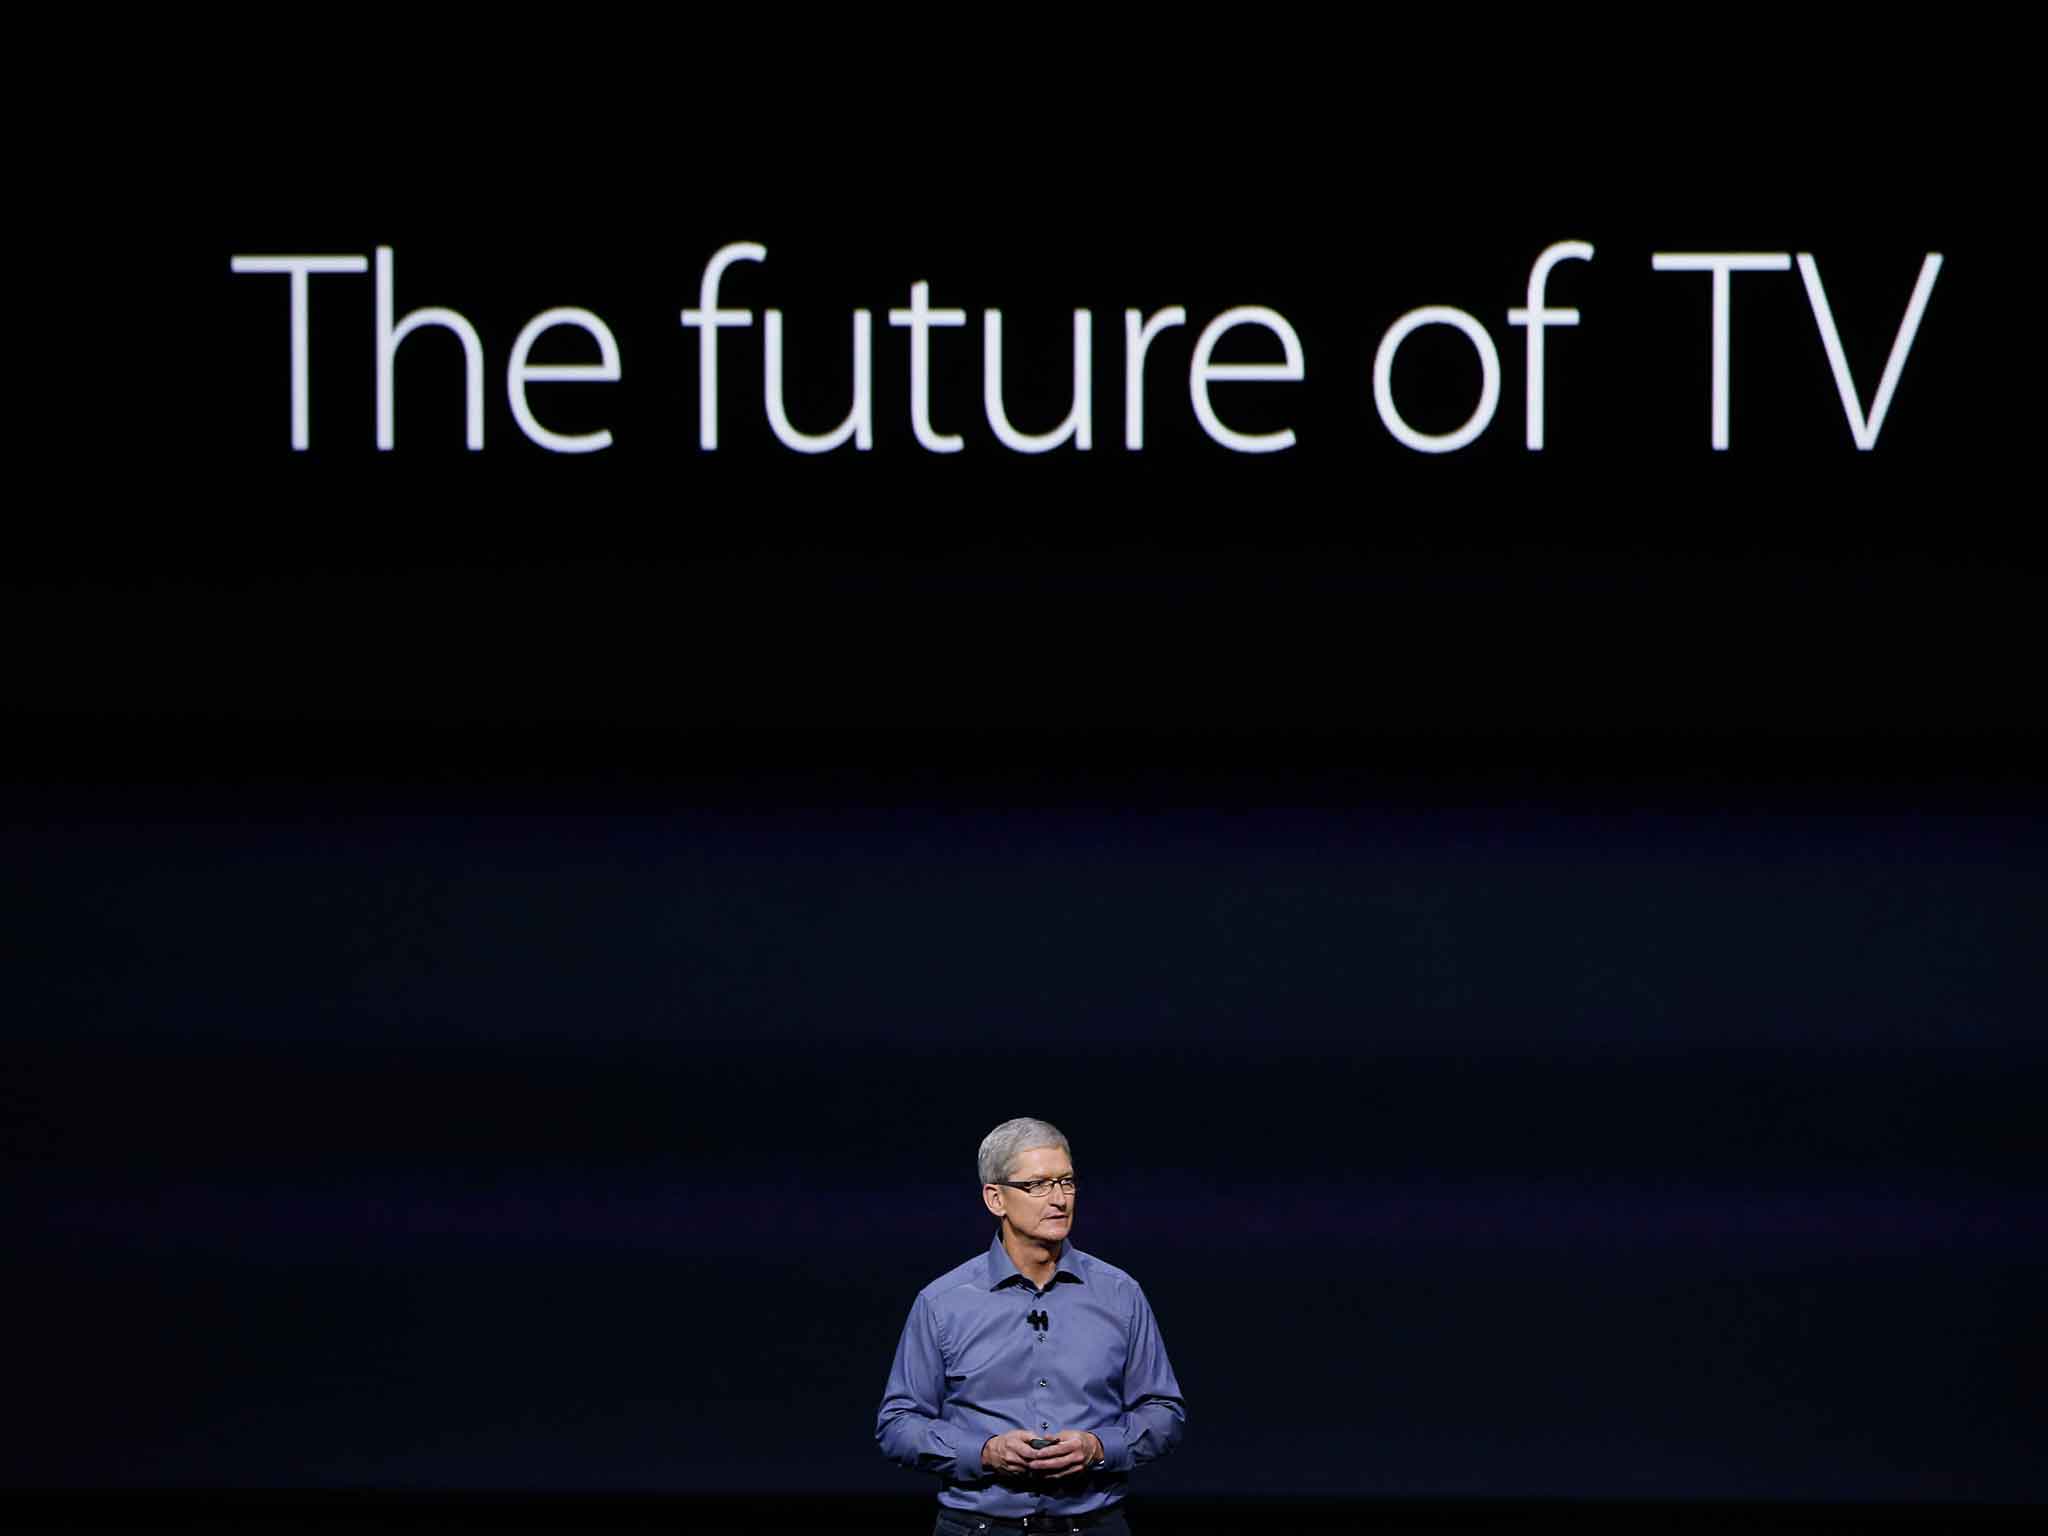 The biggest news of the night was the new Apple TV (Getty)